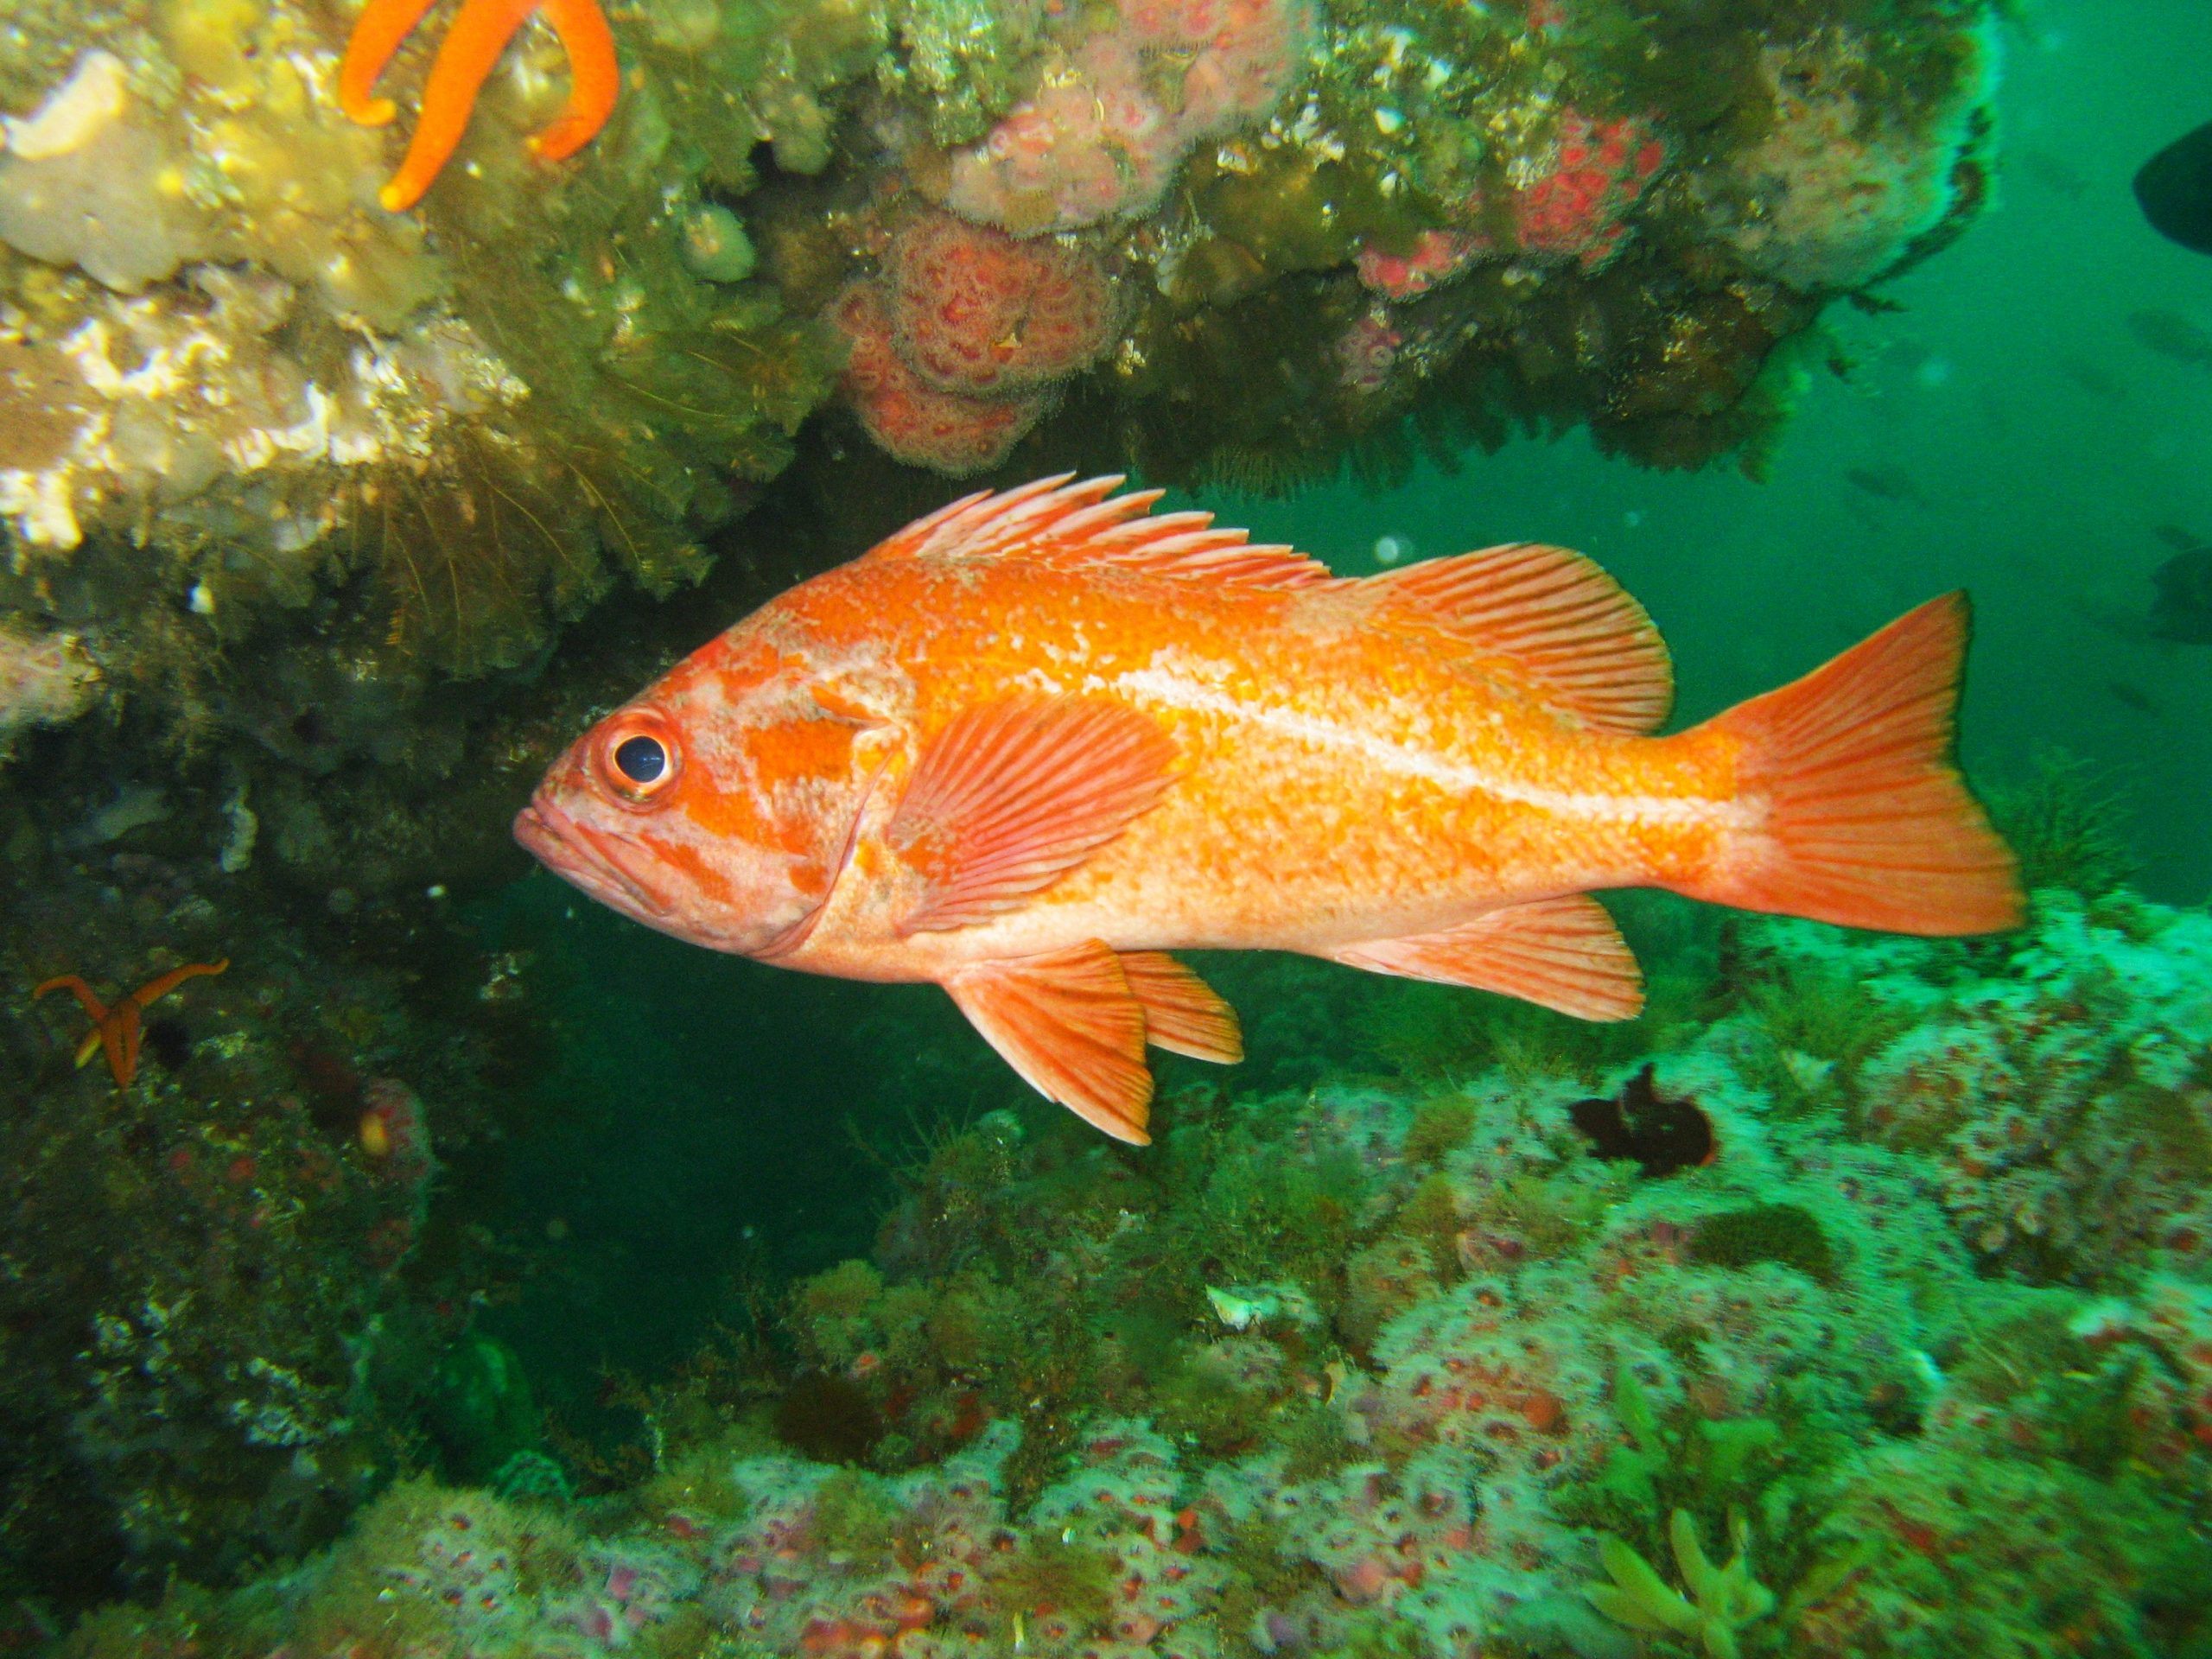 A Vermillion Rockfish in the water with coral reef in background